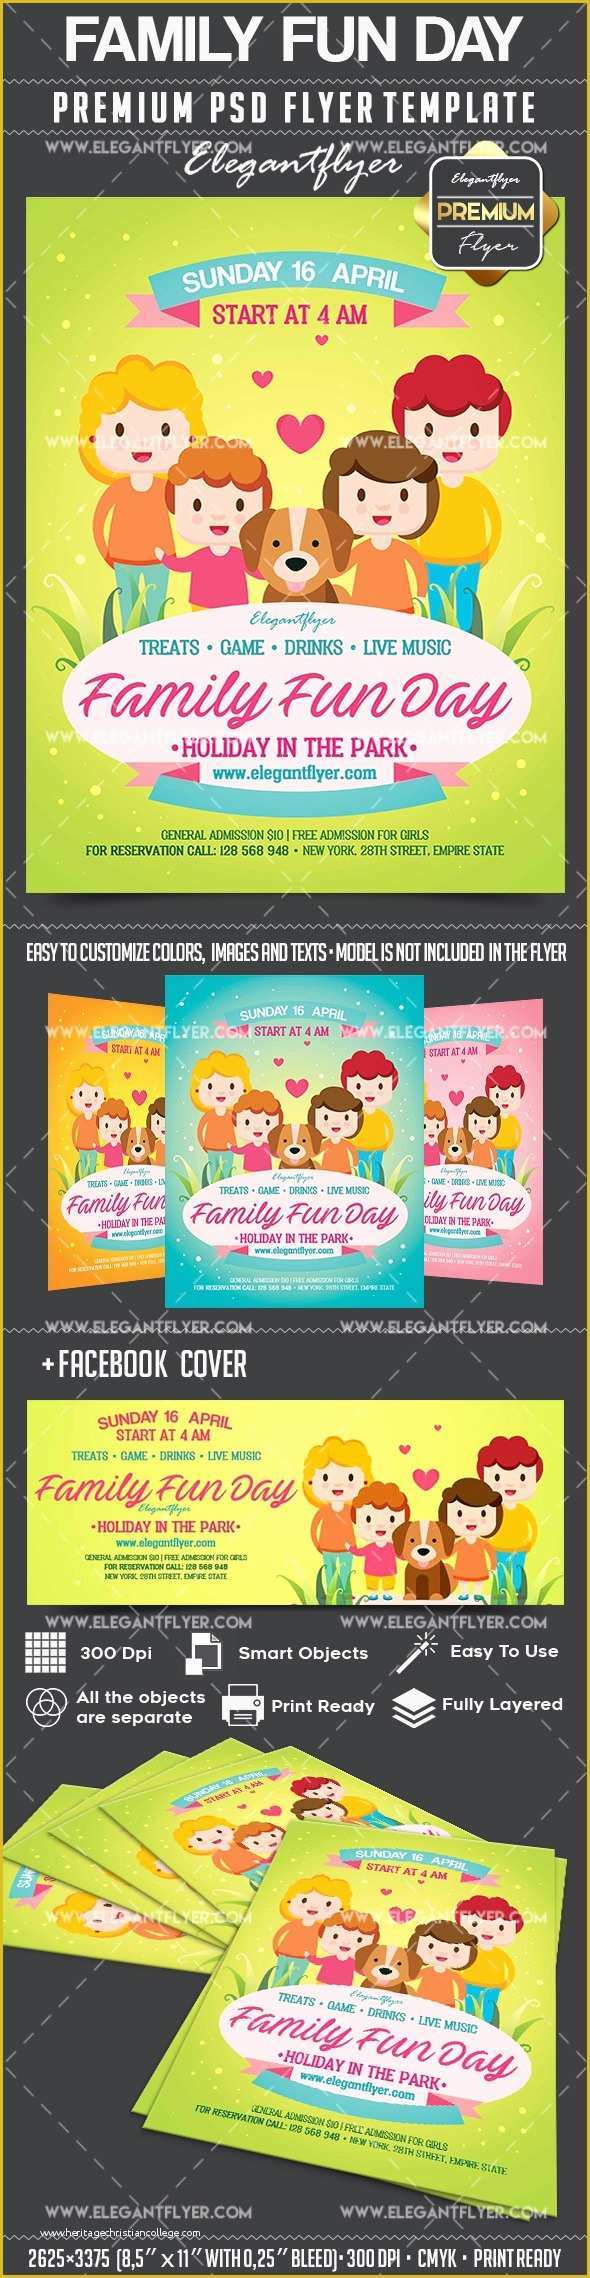 Fun Day Flyer Template Free Of Family Fun Day – Flyer Psd Template – by Elegantflyer